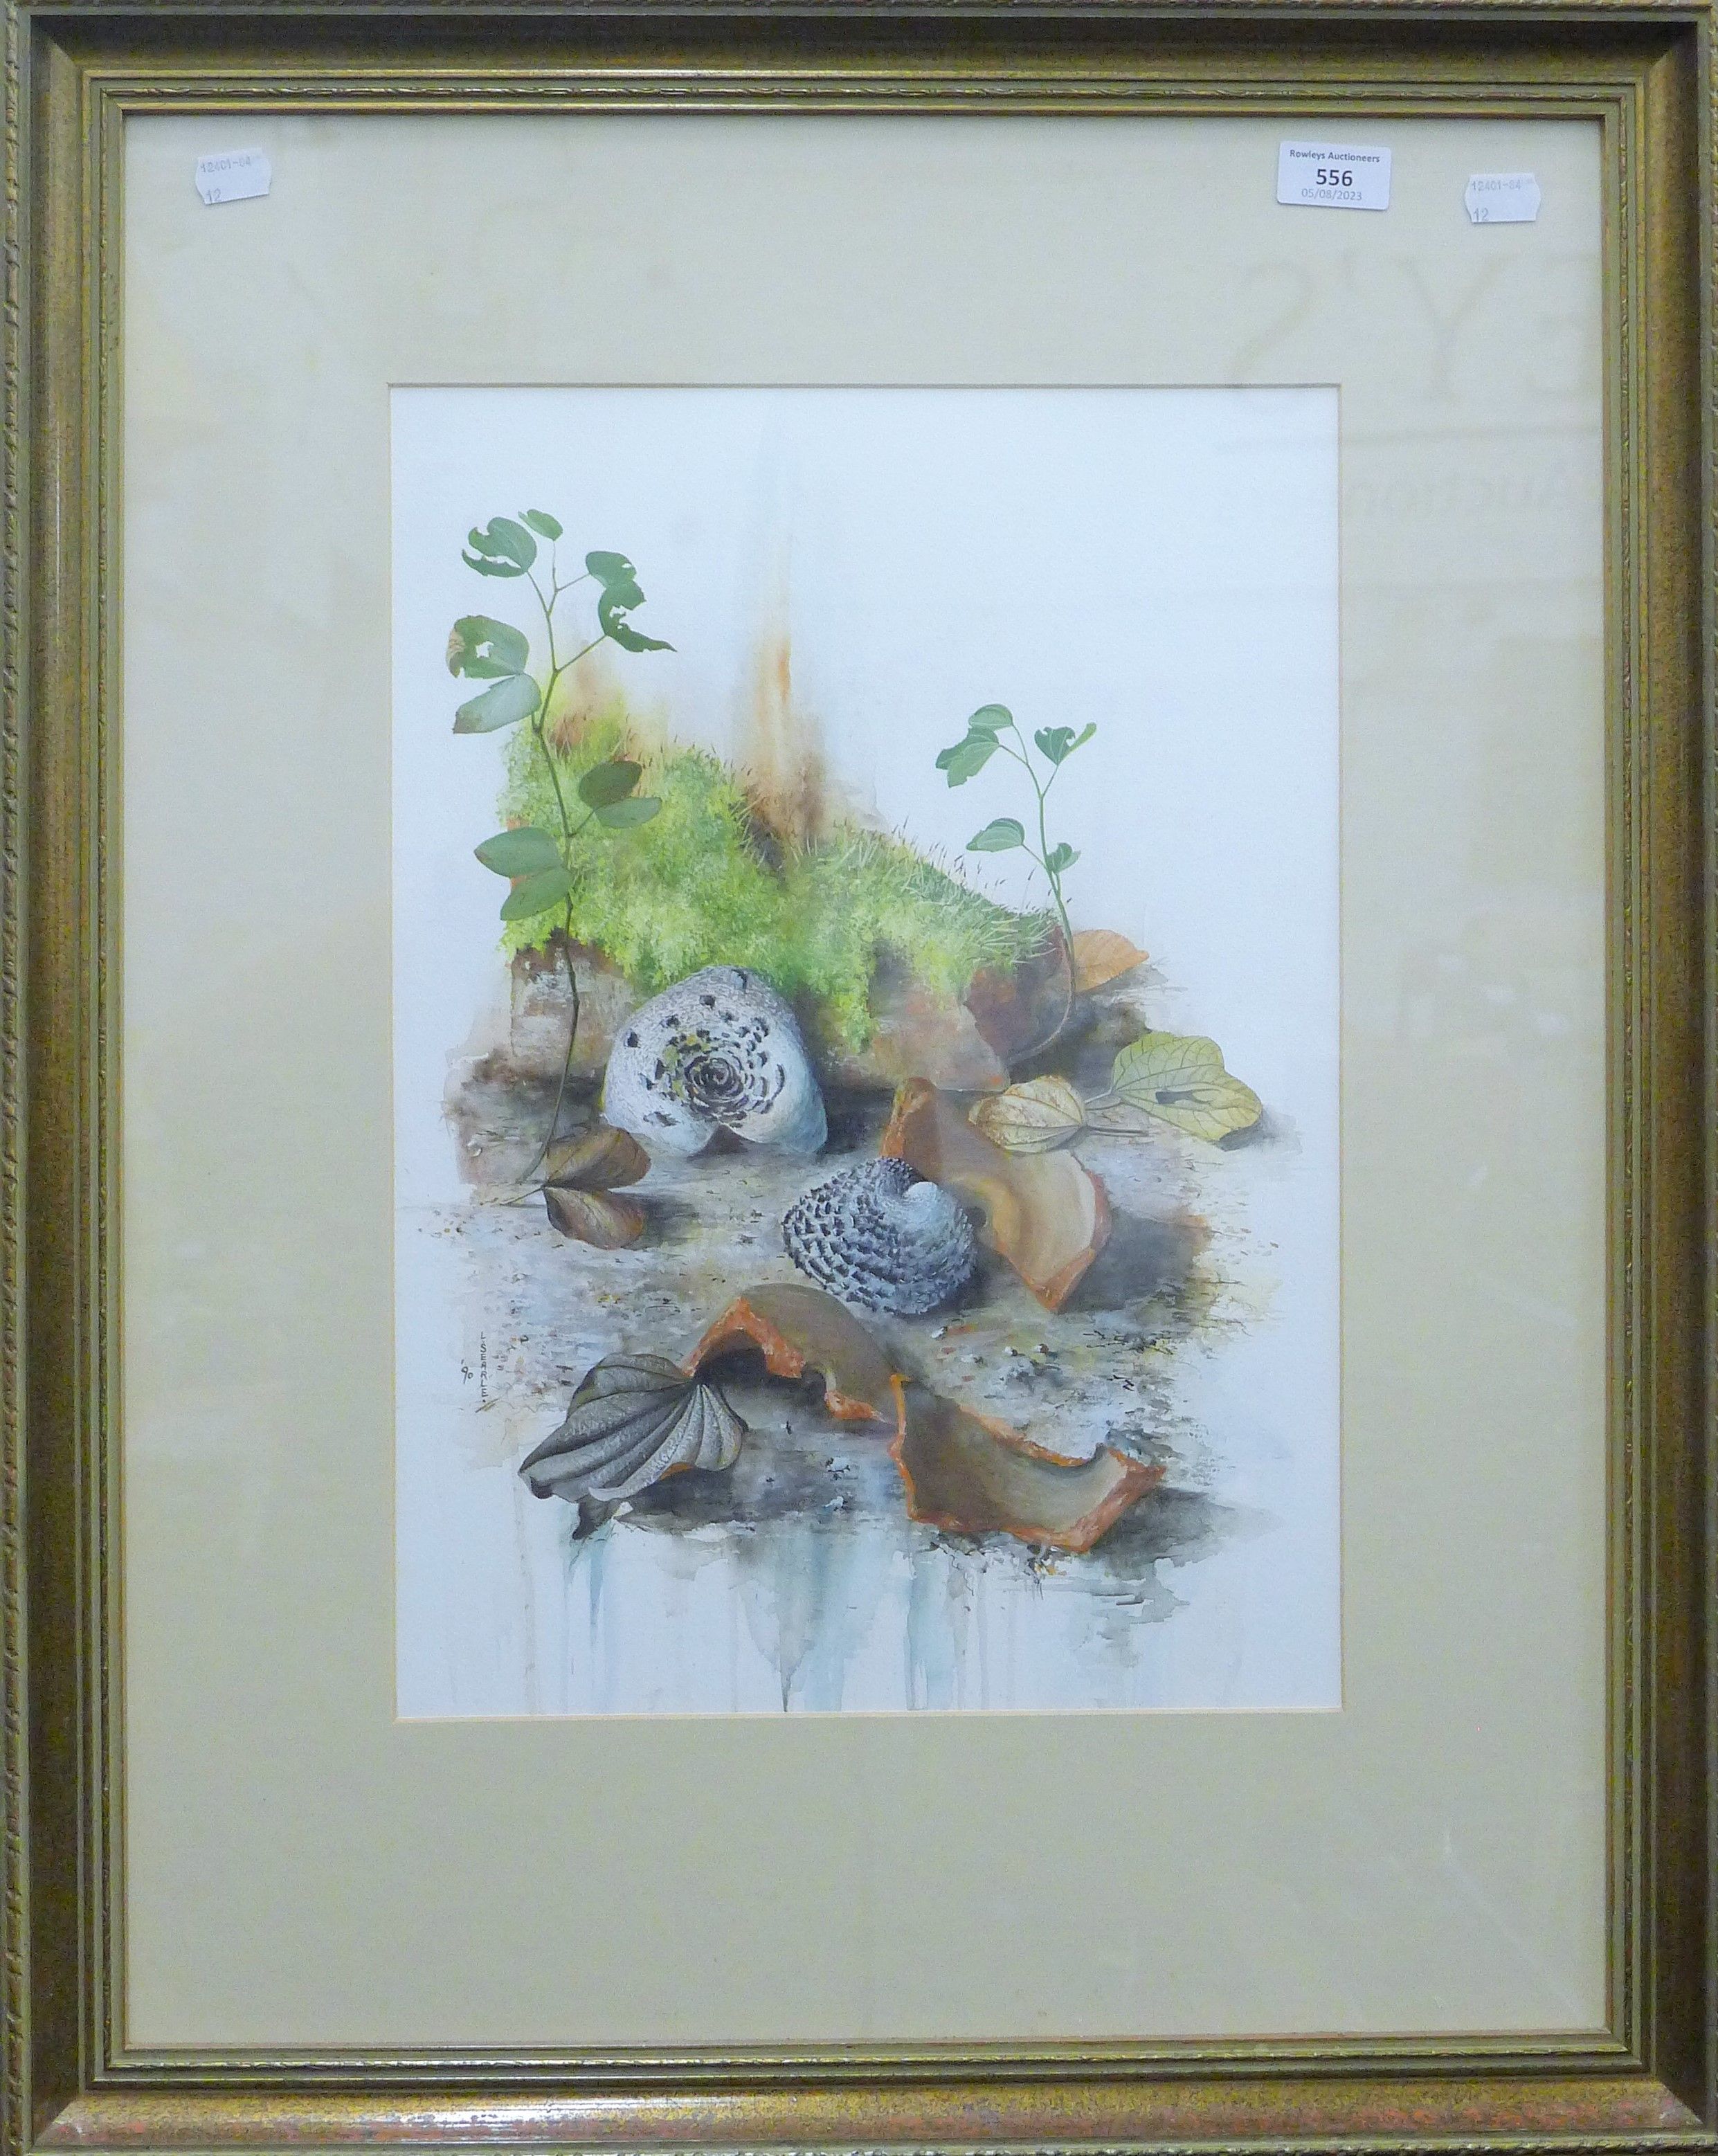 L SEARLE, Naturalistic Still Life, watercolour, framed and glazed. 32 x 44.5 cm. - Image 2 of 2